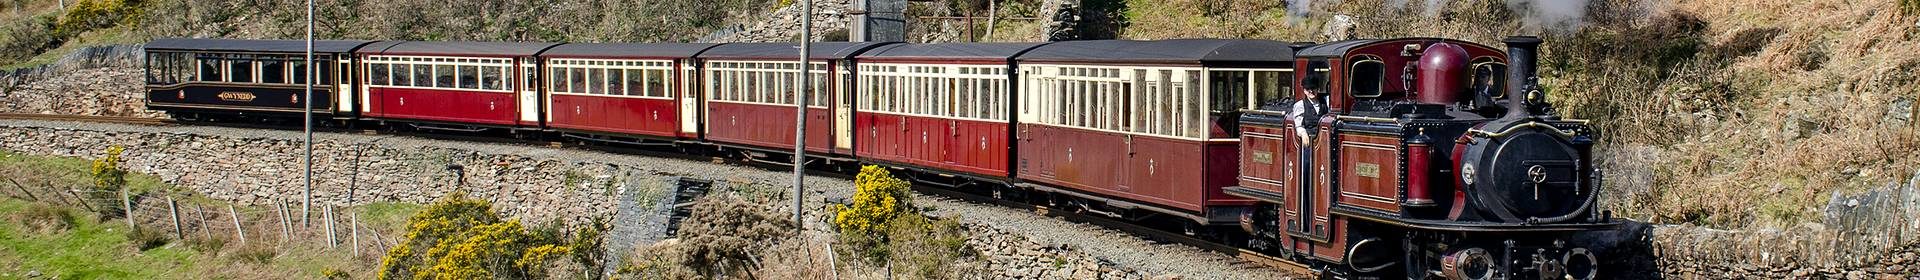 Historic rail carriages on track